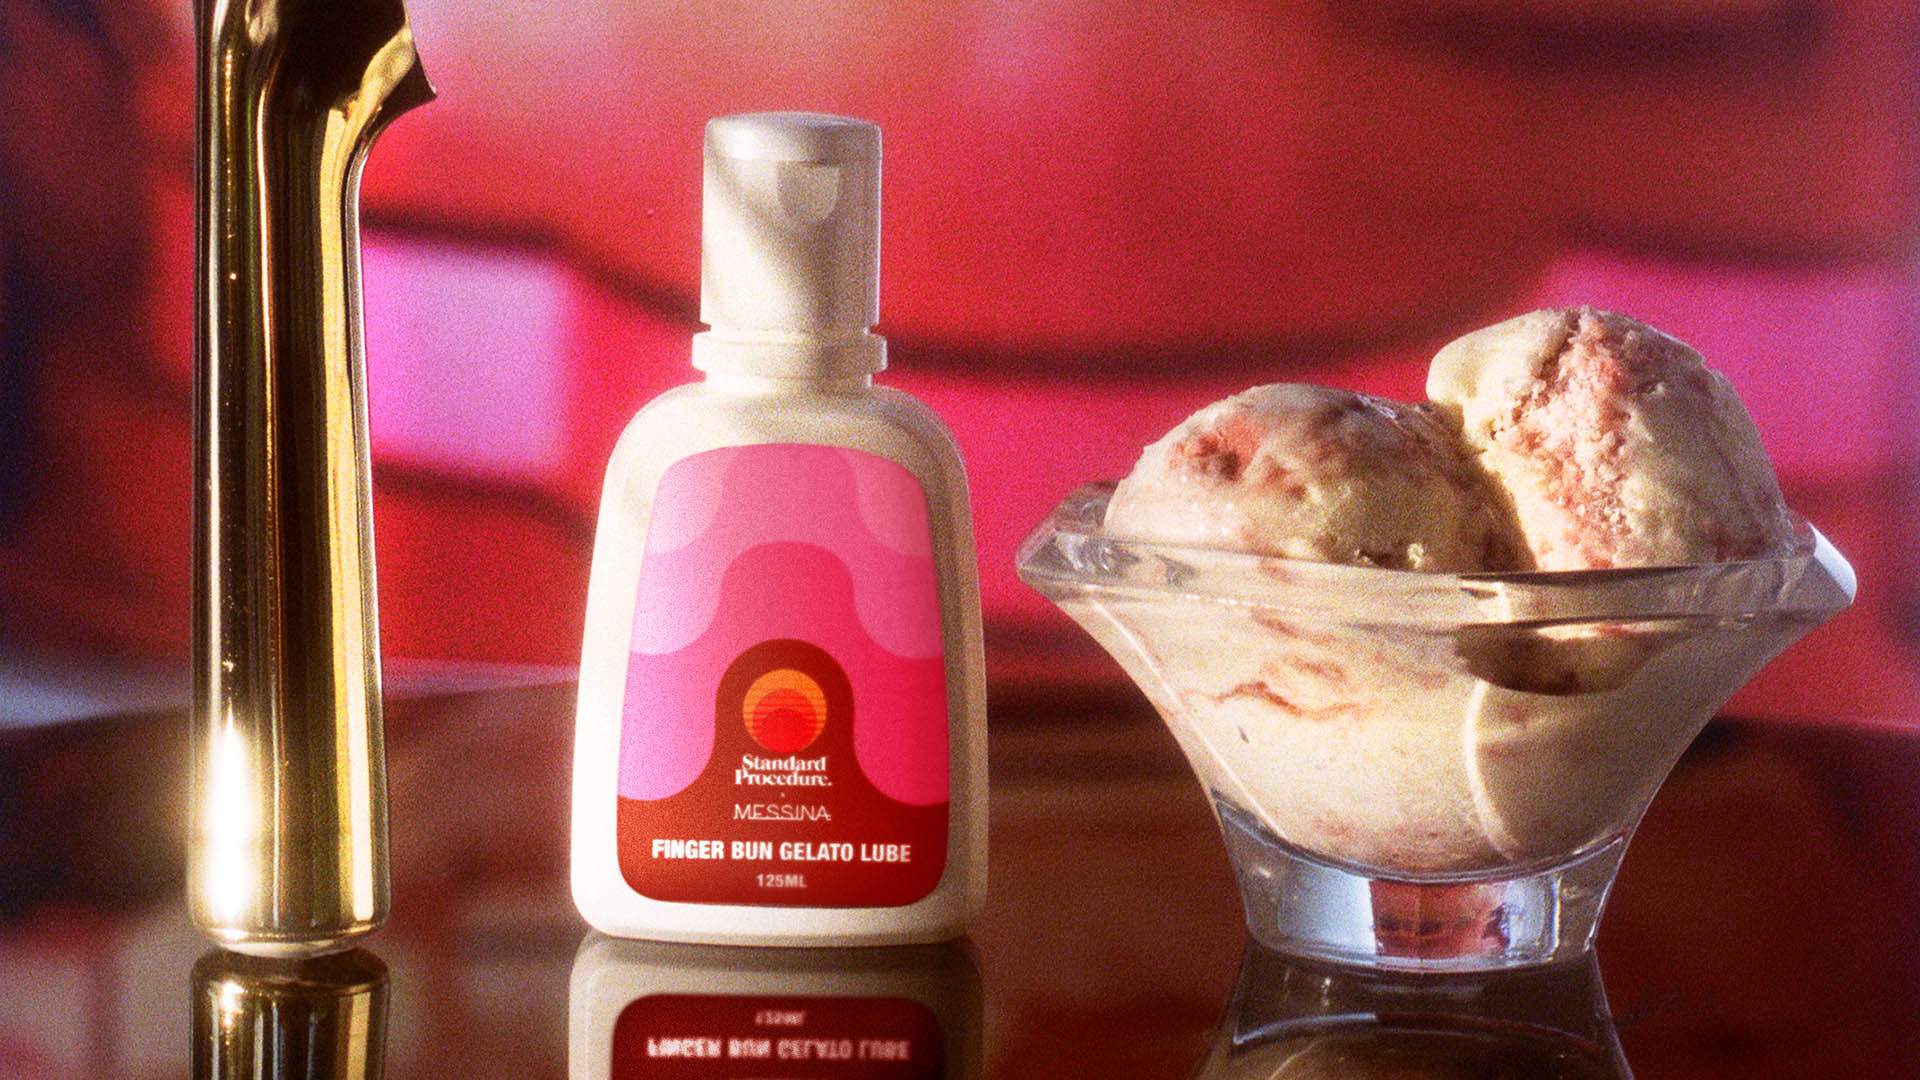 This Is Saucy: Messina Has Teamed Up with Standard Procedure on a Banging New Finger Bun Gelato Lube